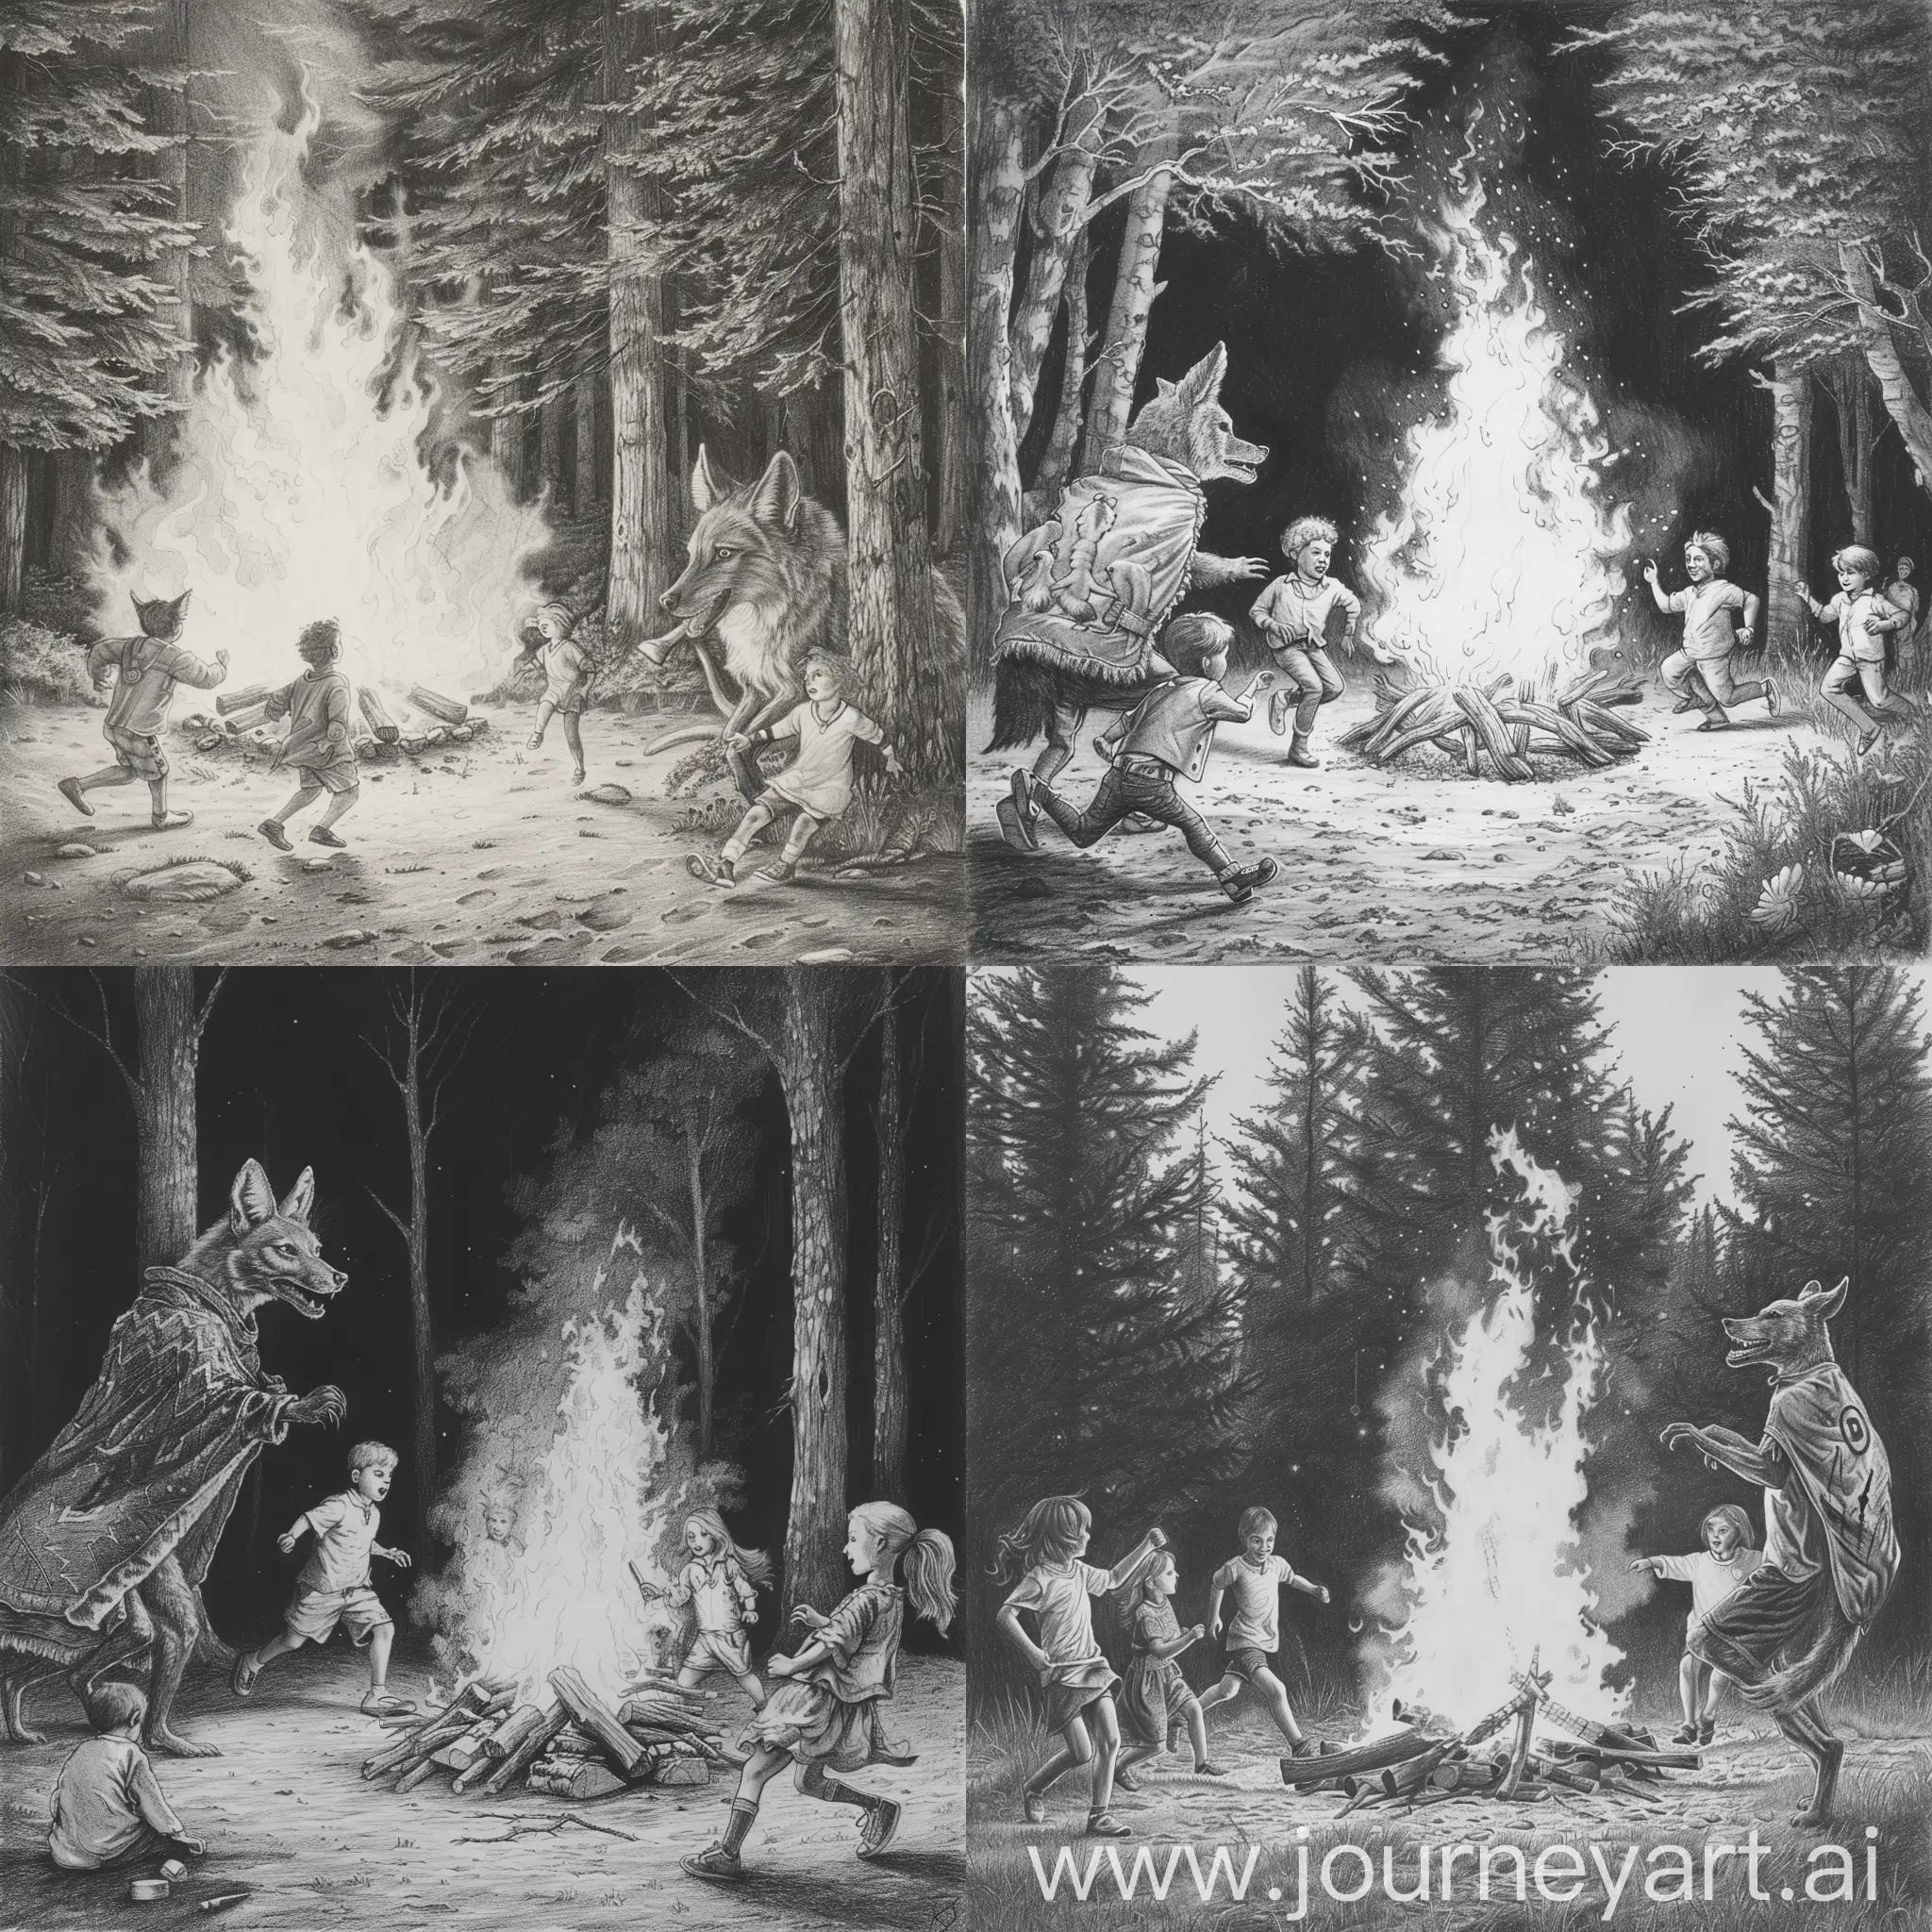 pencil drawing, black and white, graphics, forest clearing, large bonfire, children running around the campfire, children are being watched by an anthropomorphic jackal in a mantle